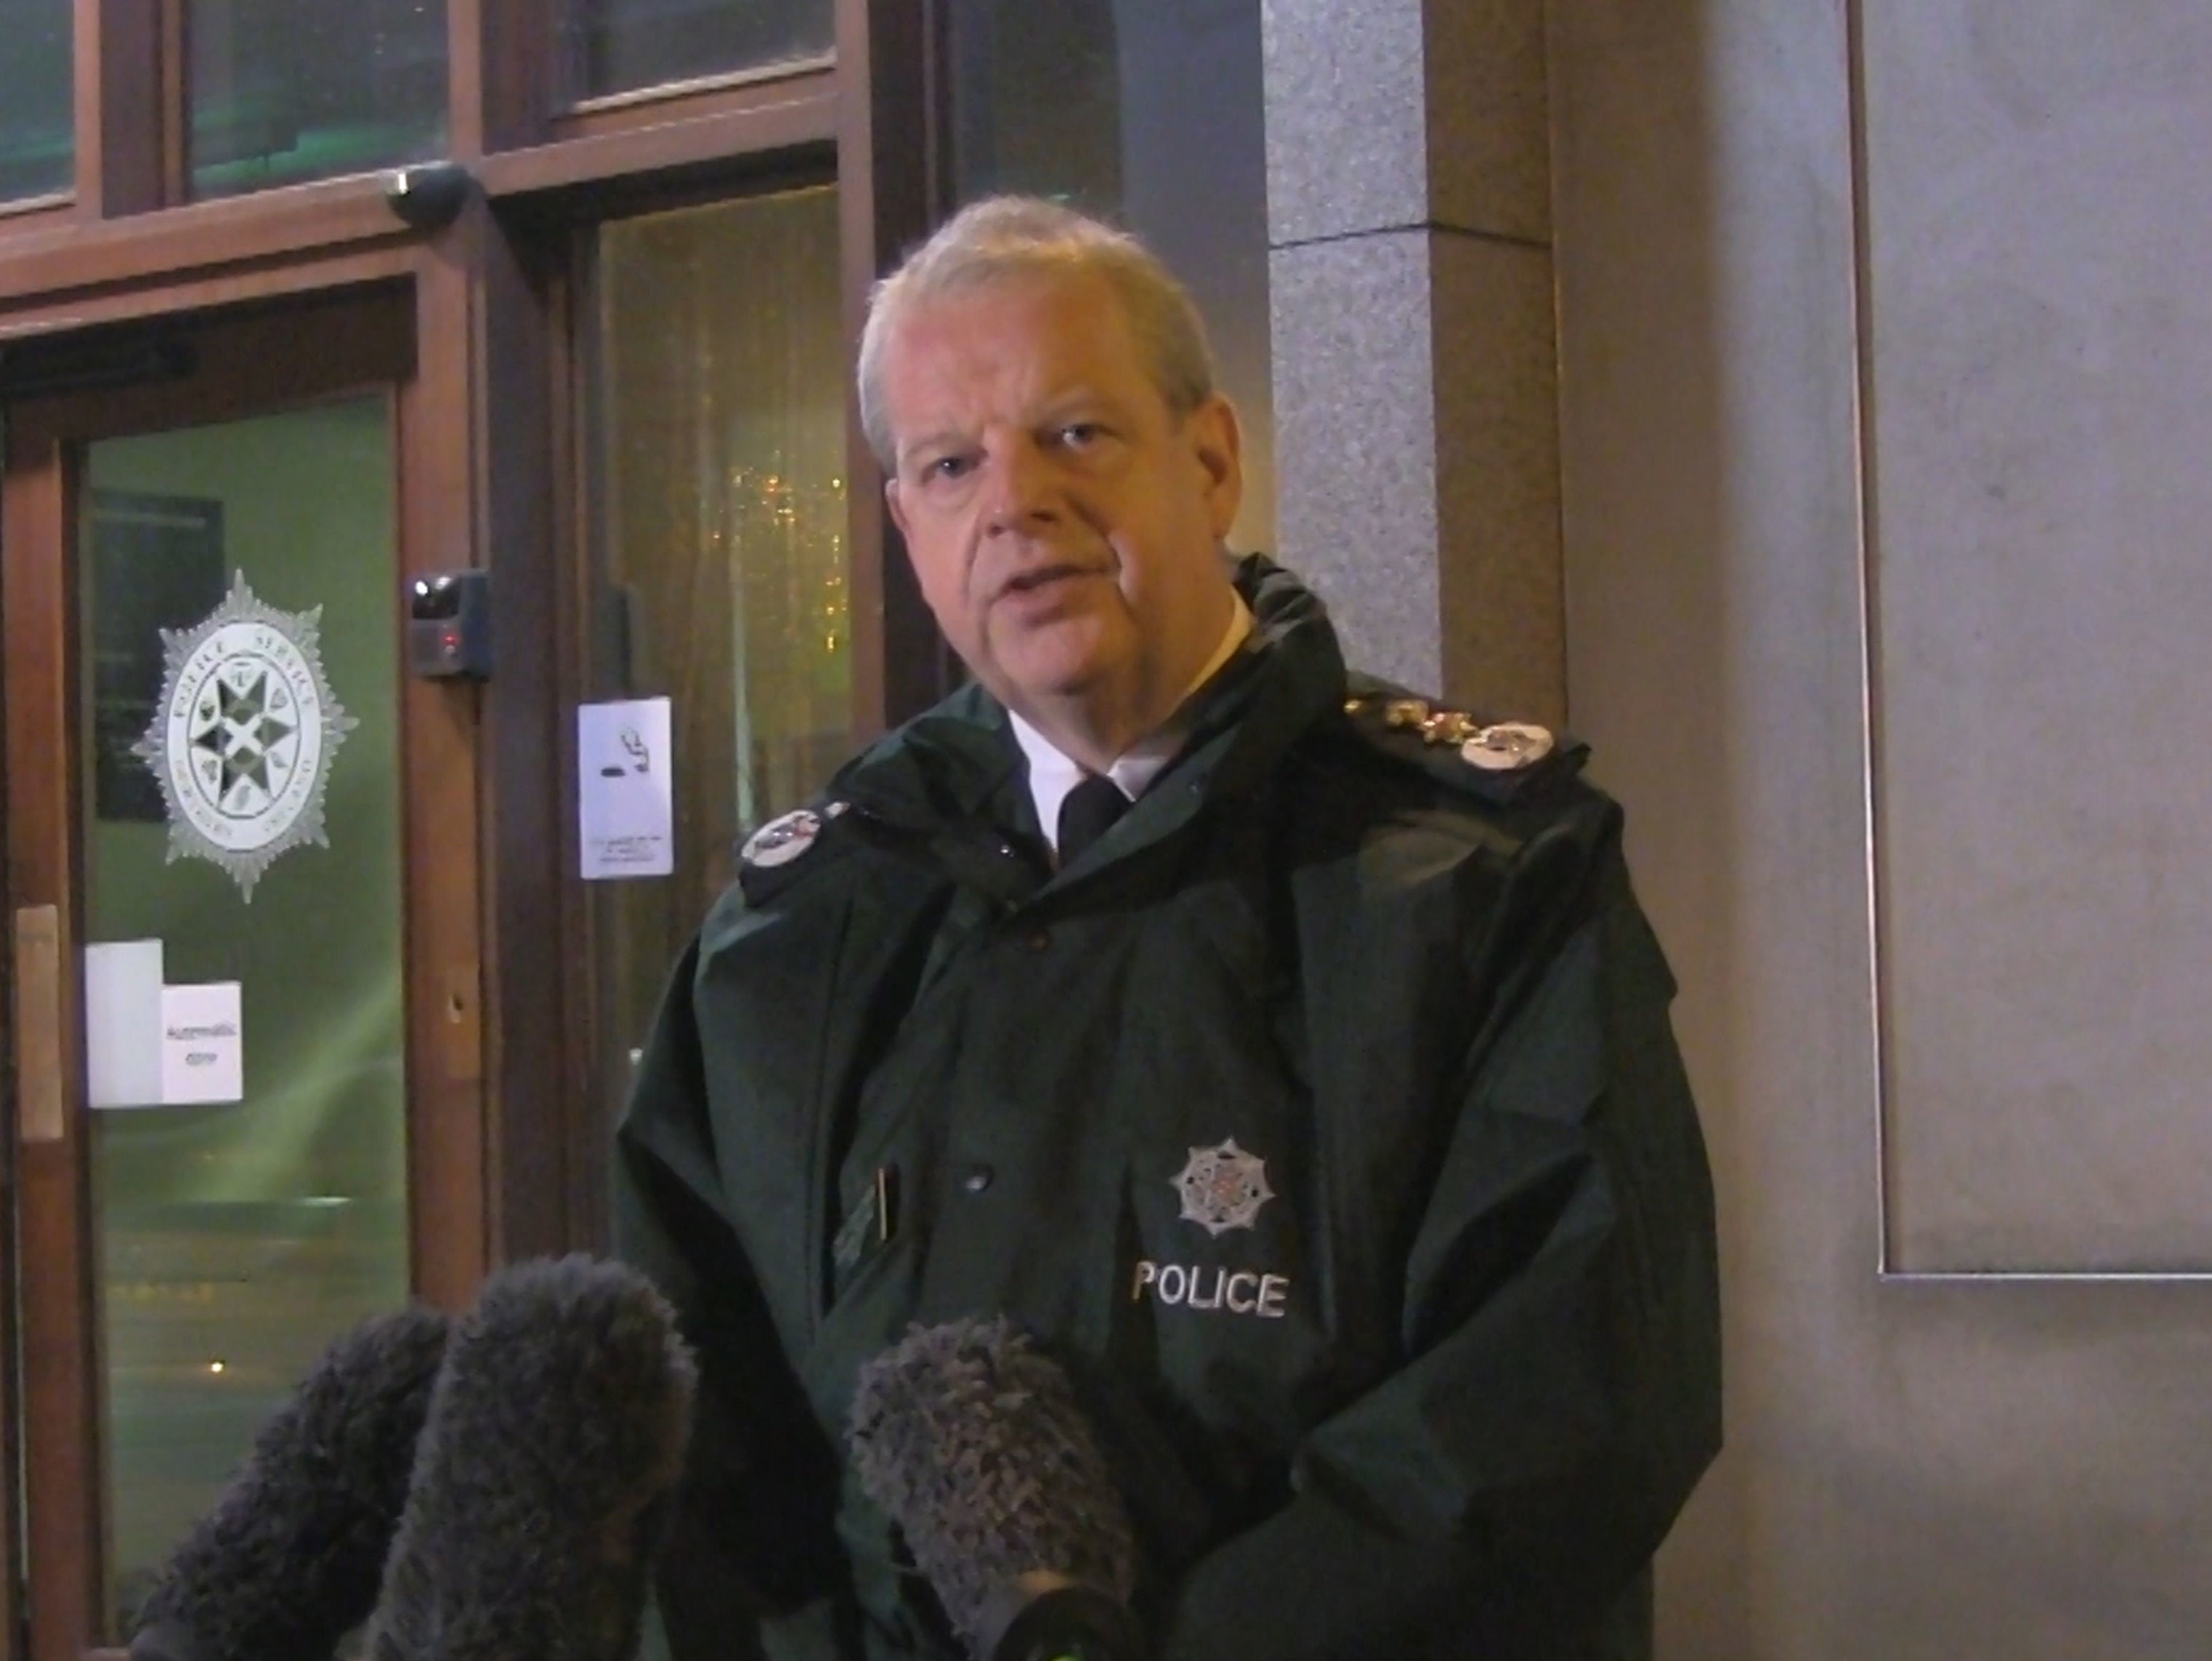 PSNI chief constable Simon Byrne apologises for the incident at a memorial event in Belfast